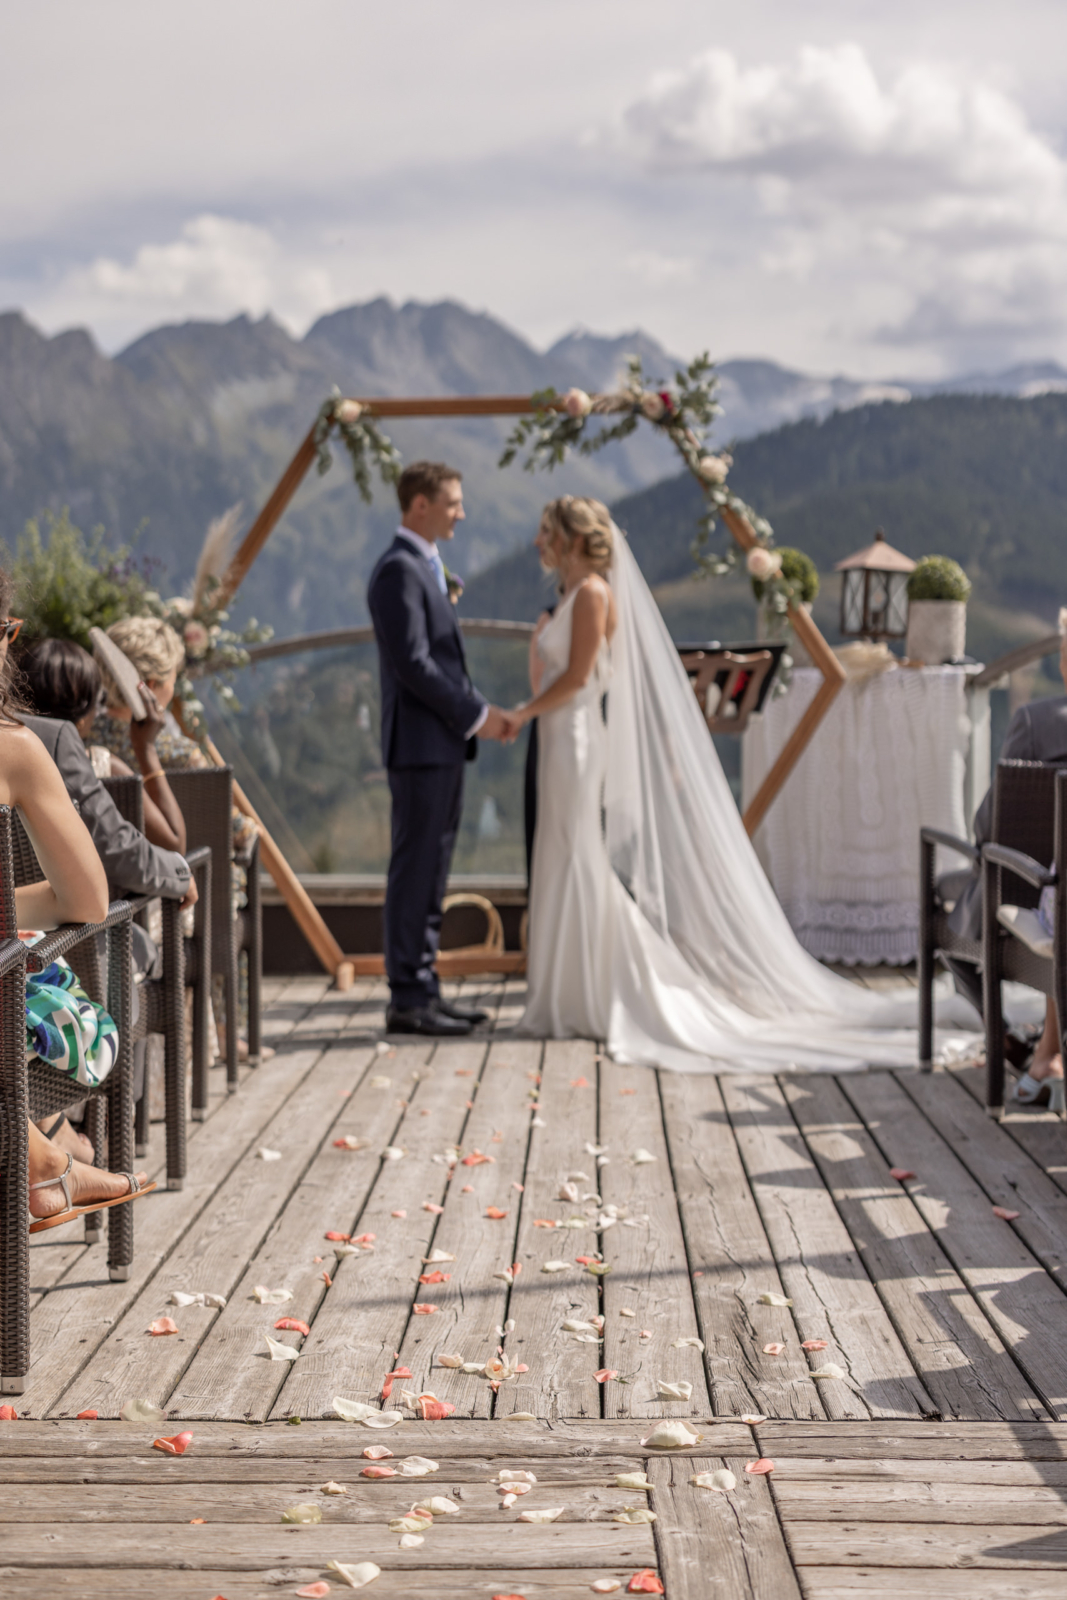 A Beautiful Wedding in the mountains at Rössl Alm in Zillertal